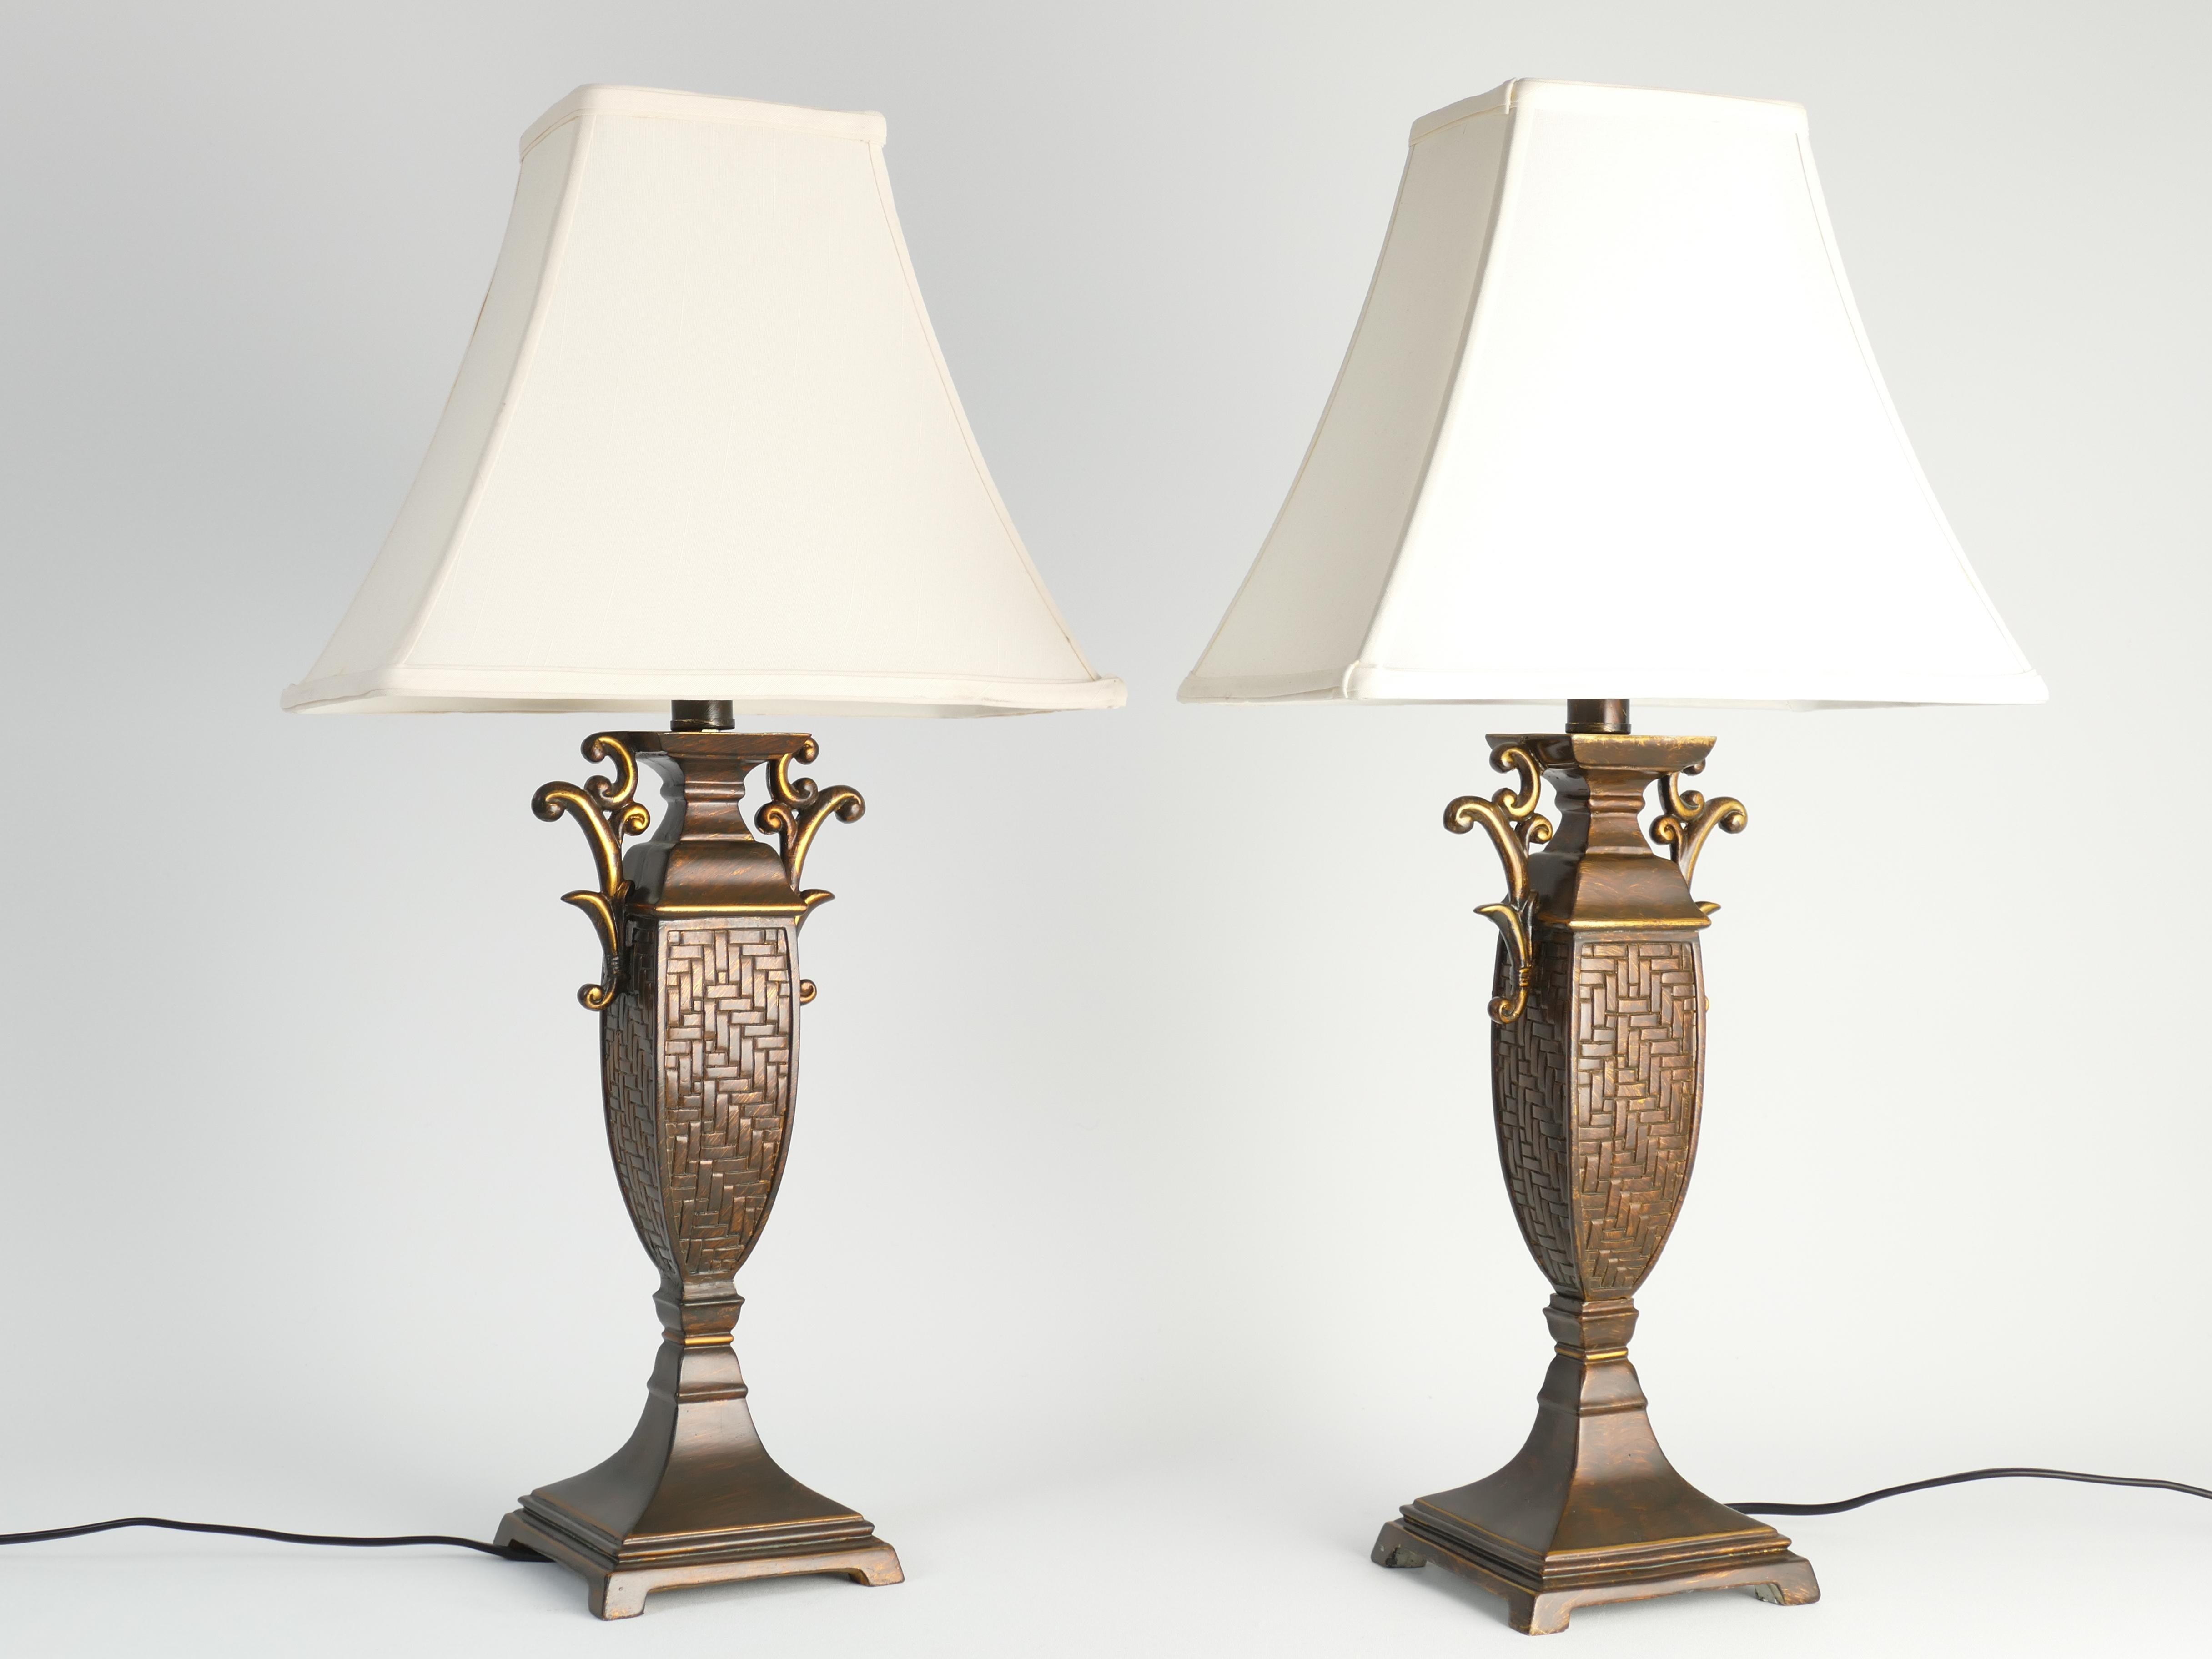 Chinoiserie Faux Rattan Amphora Table Lamps by Aneta, Sweden 1980's For Sale 1